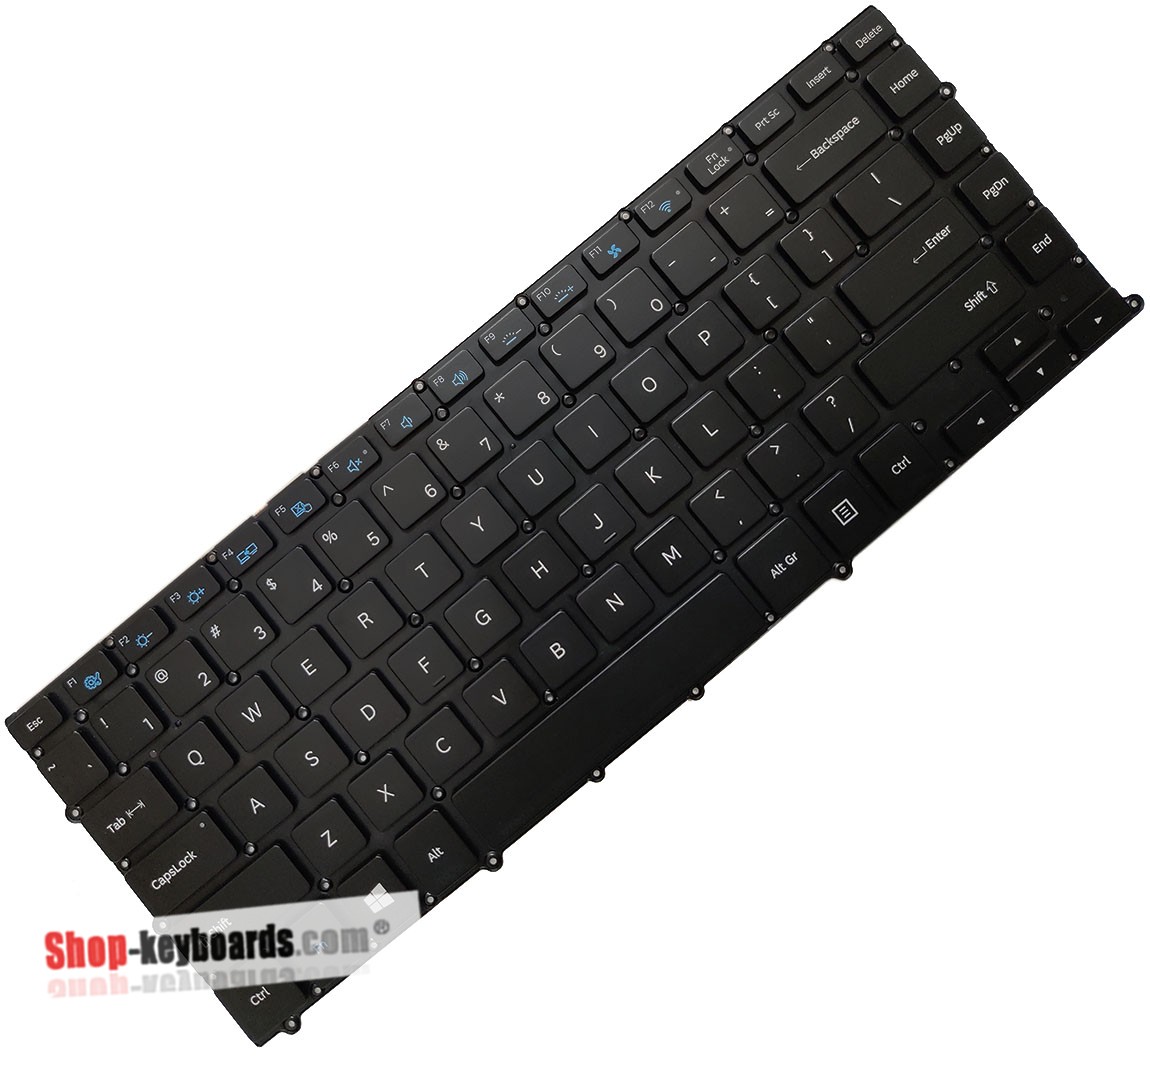 Samsung NP900X4B-A01US  Keyboard replacement